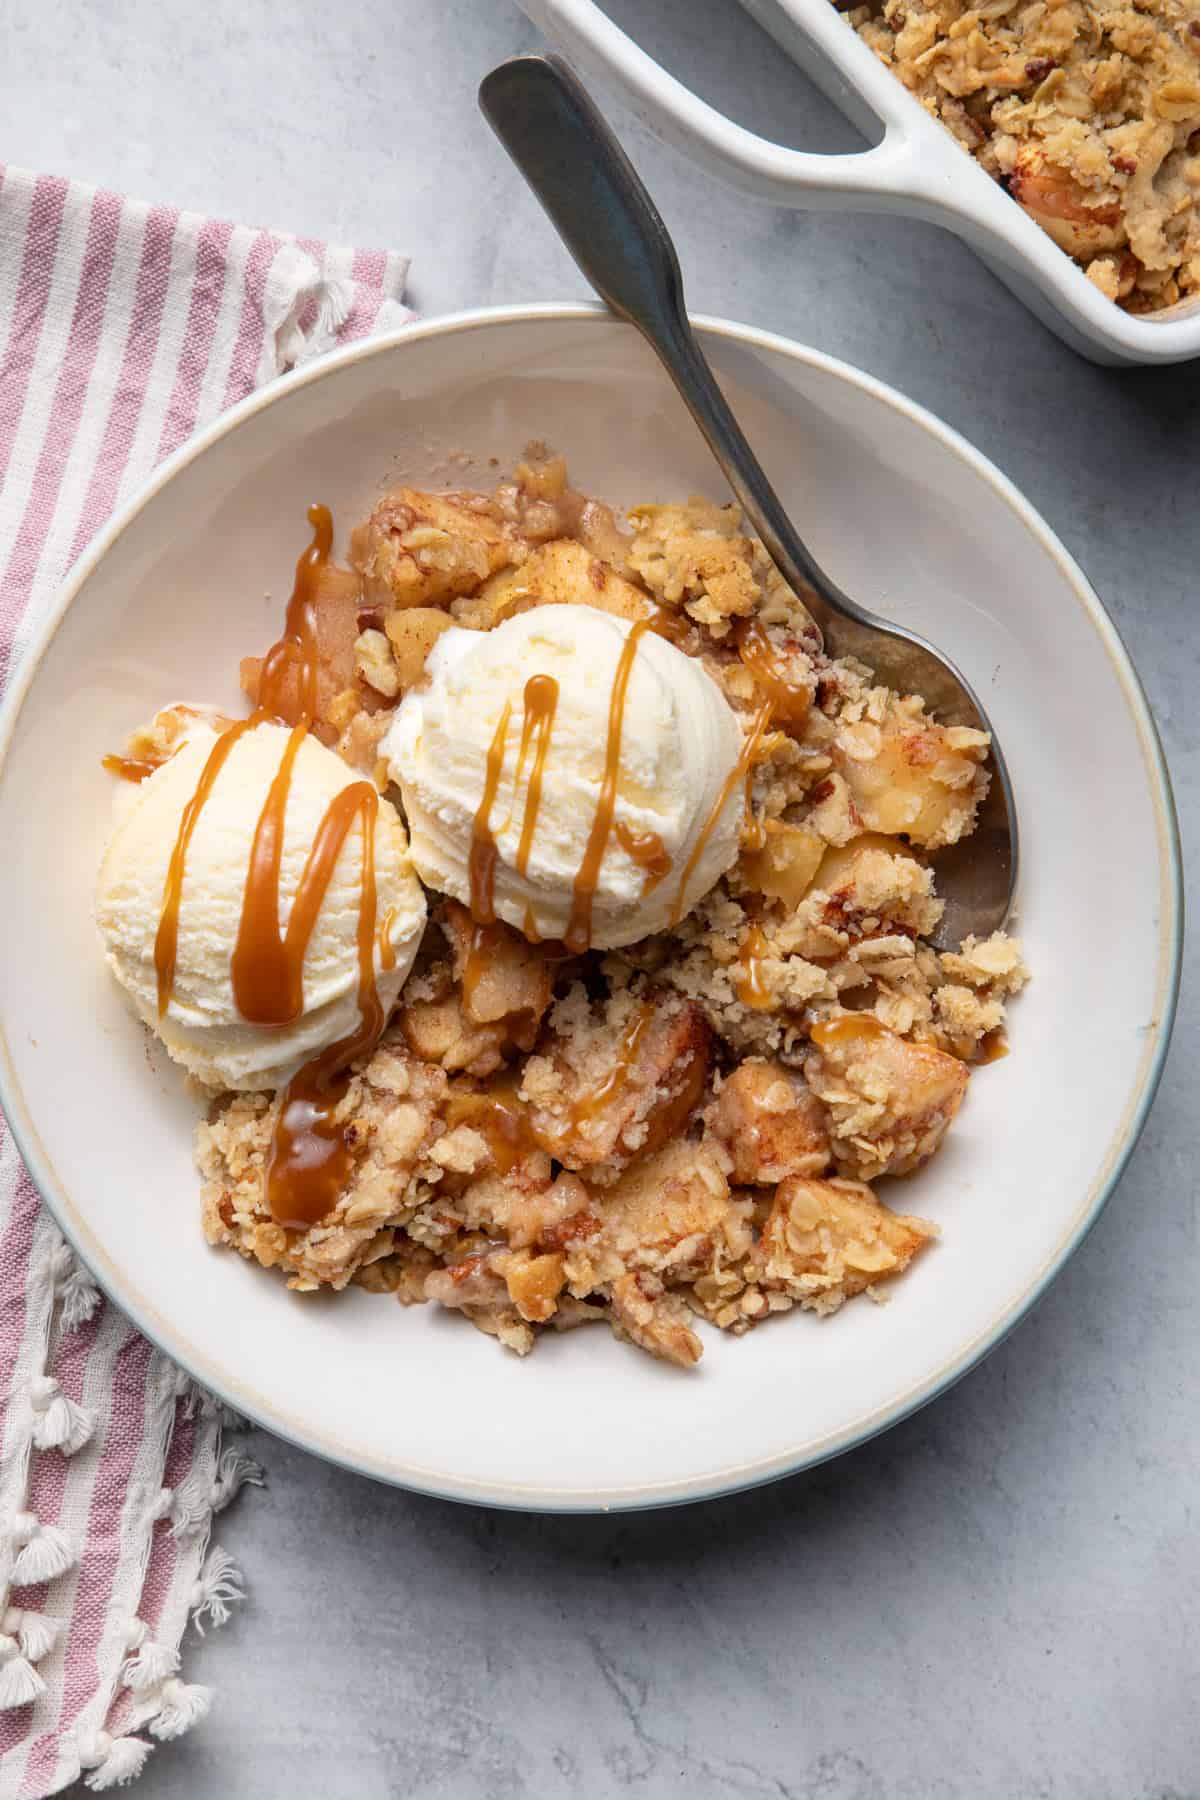 Apple crisp served with two scoops of vanilla ice cream and caramel sauce and spoon inside bowl